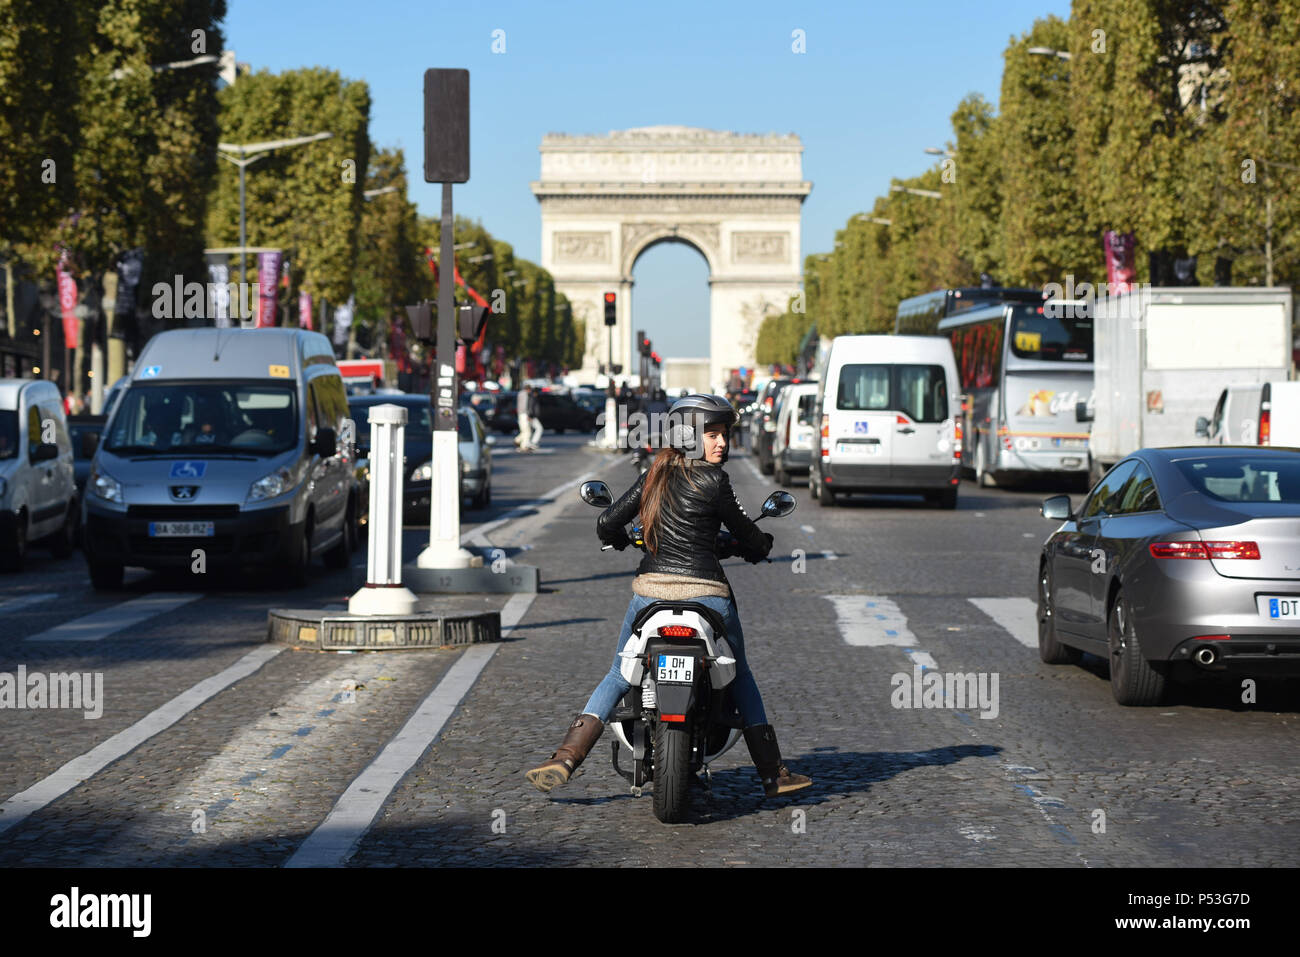 October 9, 2015 - Paris, France: Emma Fleurose drives a Cityscoot, an  electric scooter that will soon be available as part of a self-service  rental scheme in Paris. Cityscoot is the latest